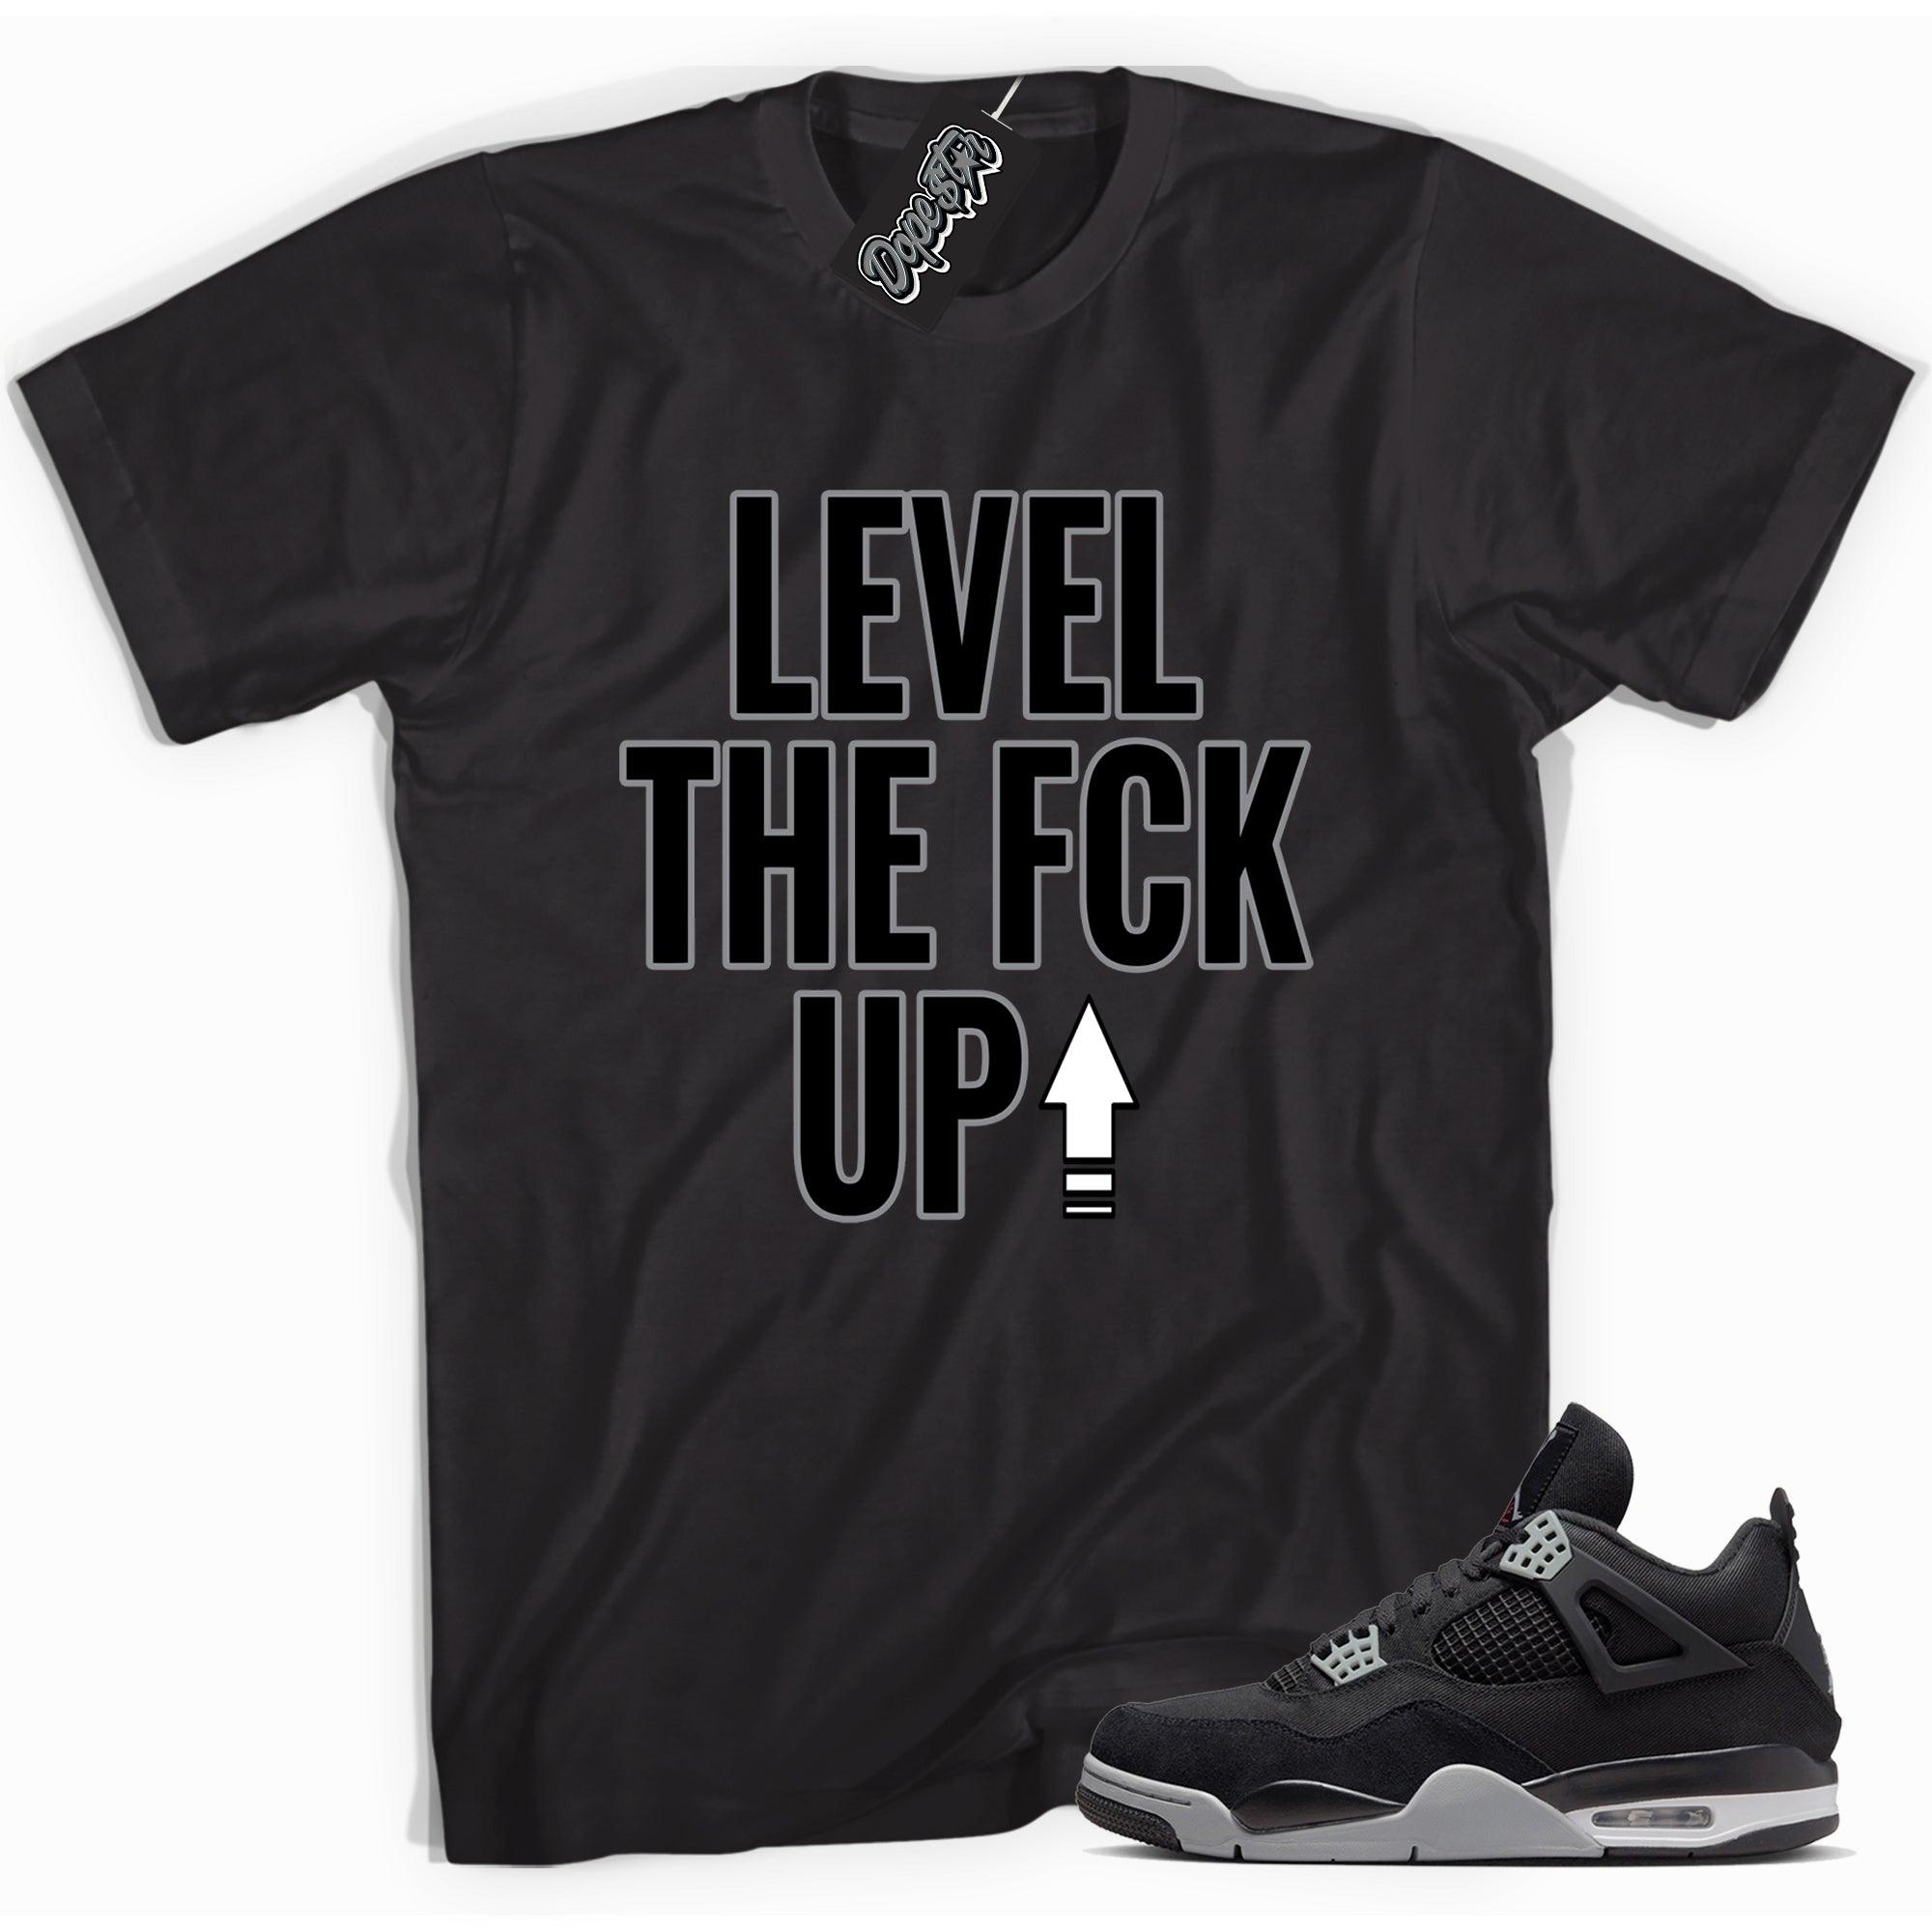 Cool black graphic tee with 'Level Up' print, that perfectly matches Air Jordan 4 Retro SE Black Canvas sneakers.